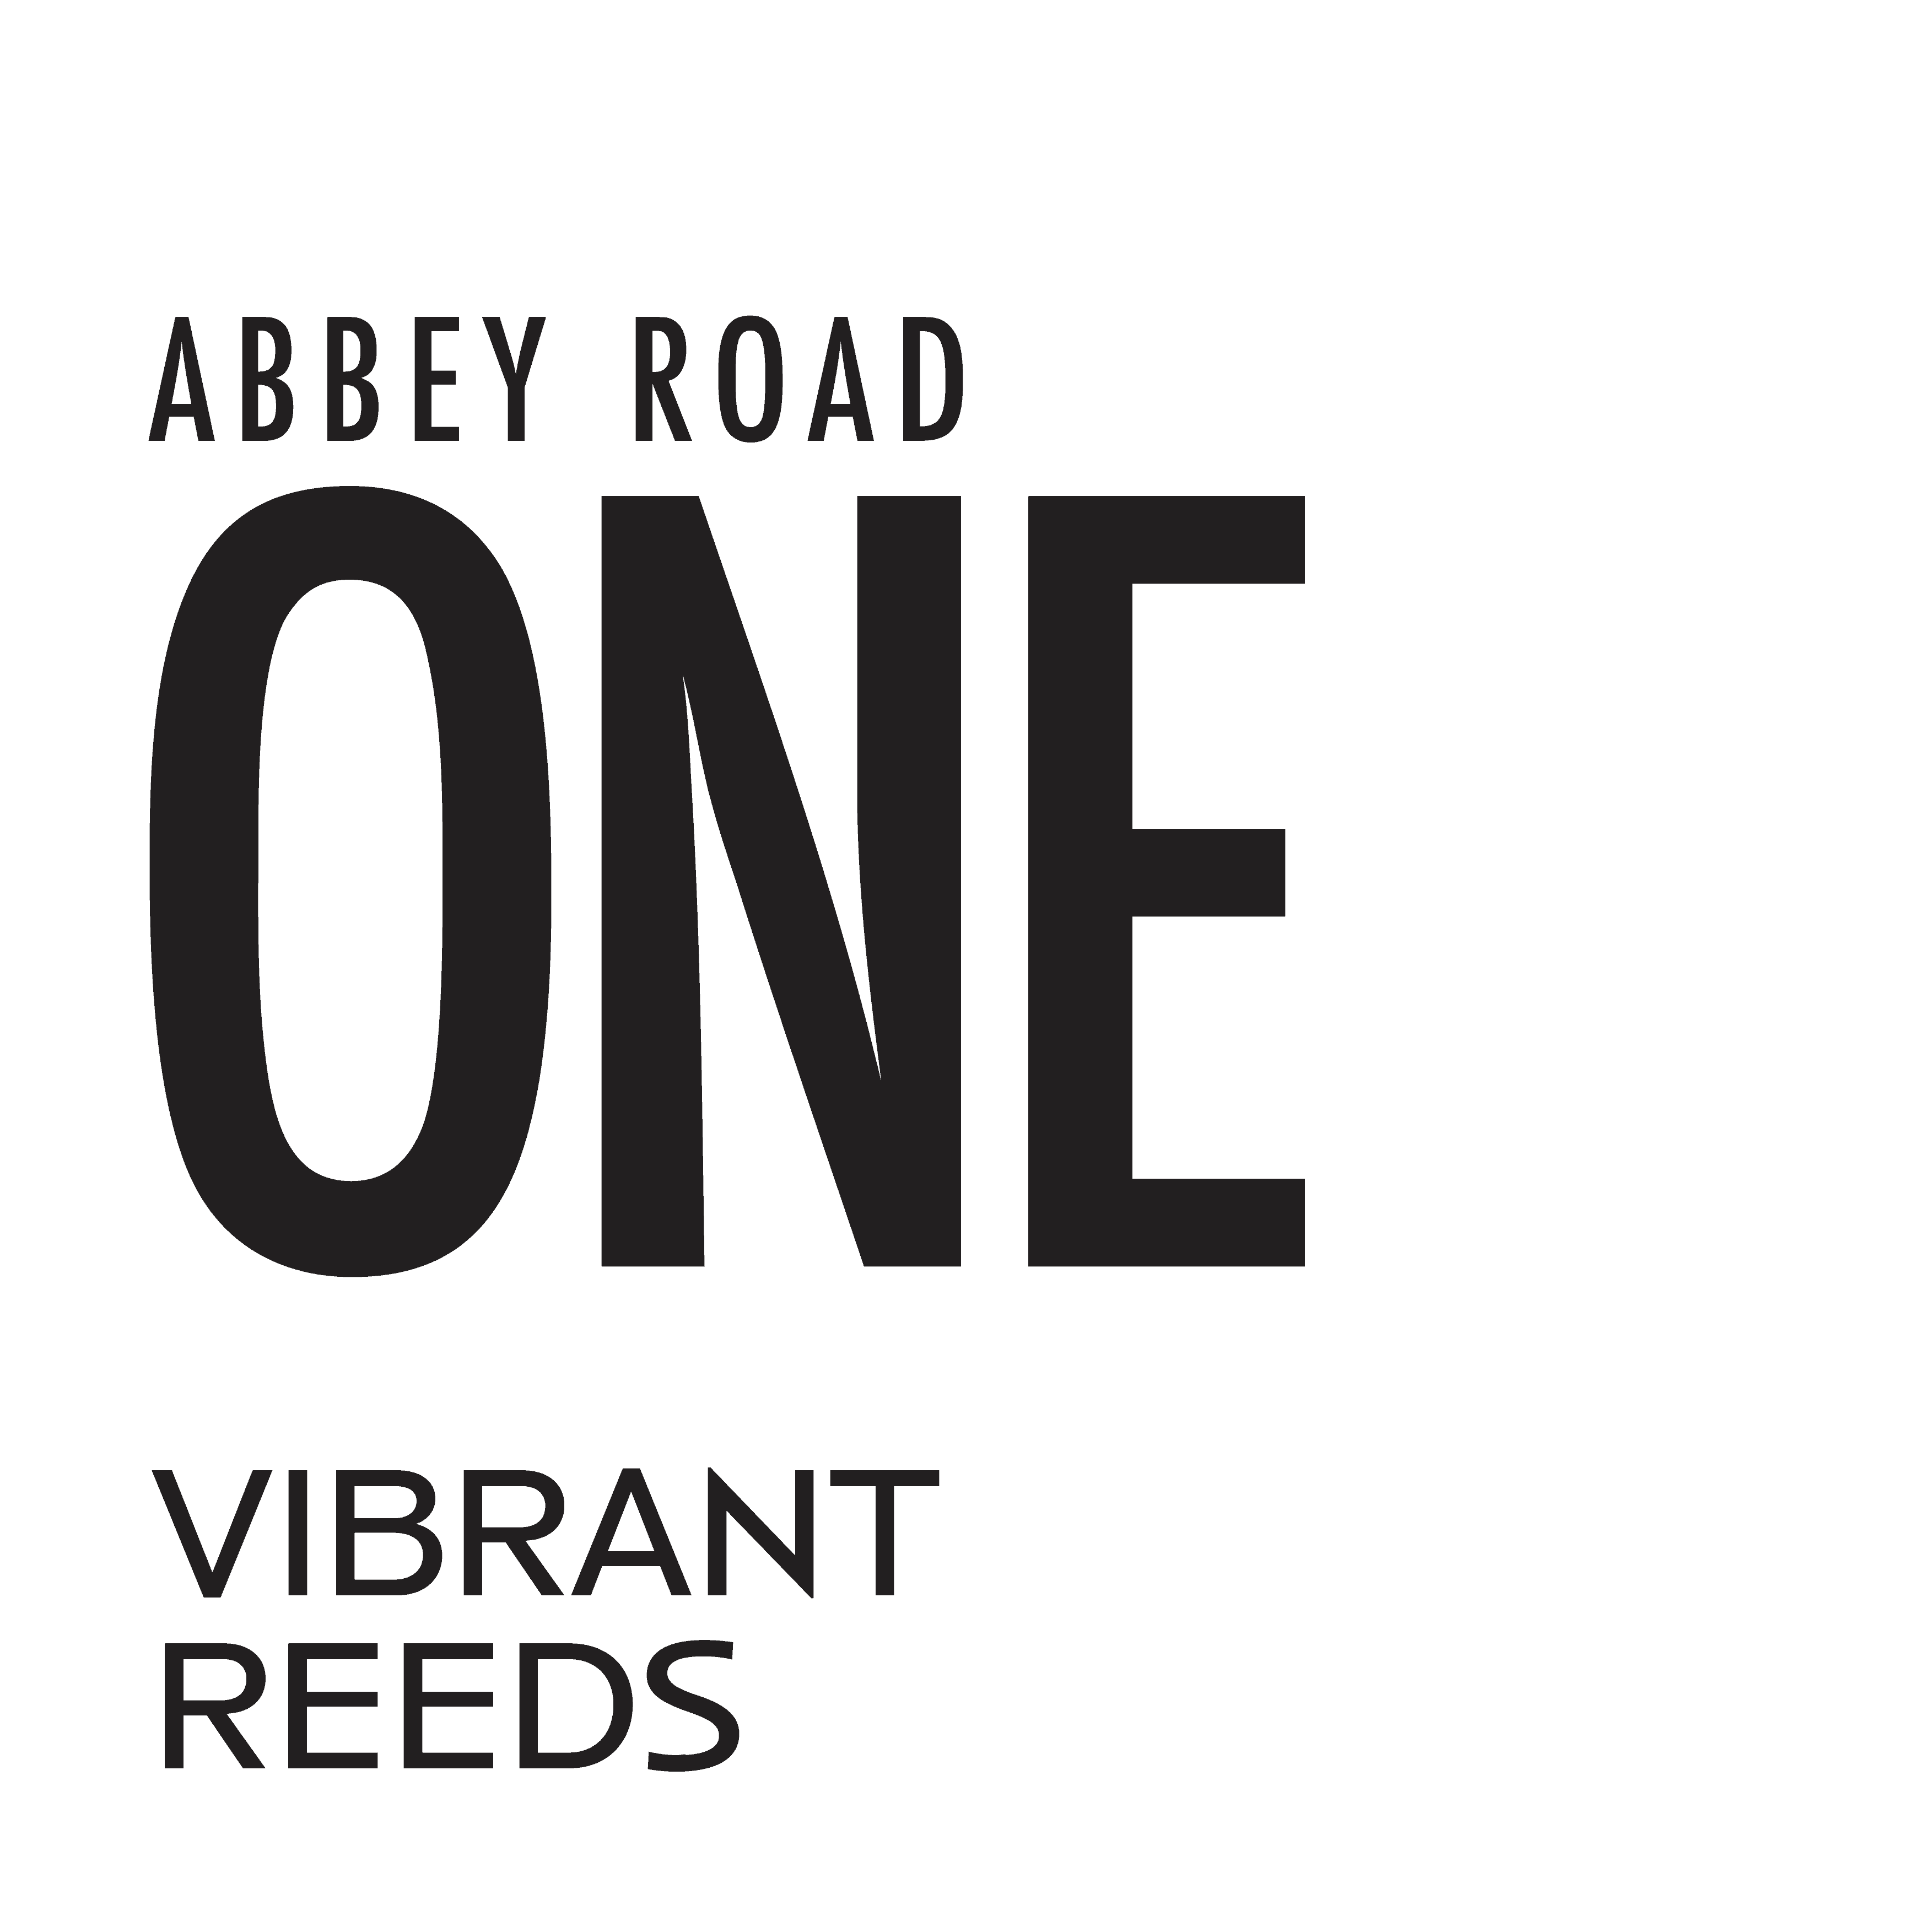 Spitfire Audio Continues its Creative Partnership with Abbey Road Studios for ABBEY ROAD ONE: VIBRANT REEDS